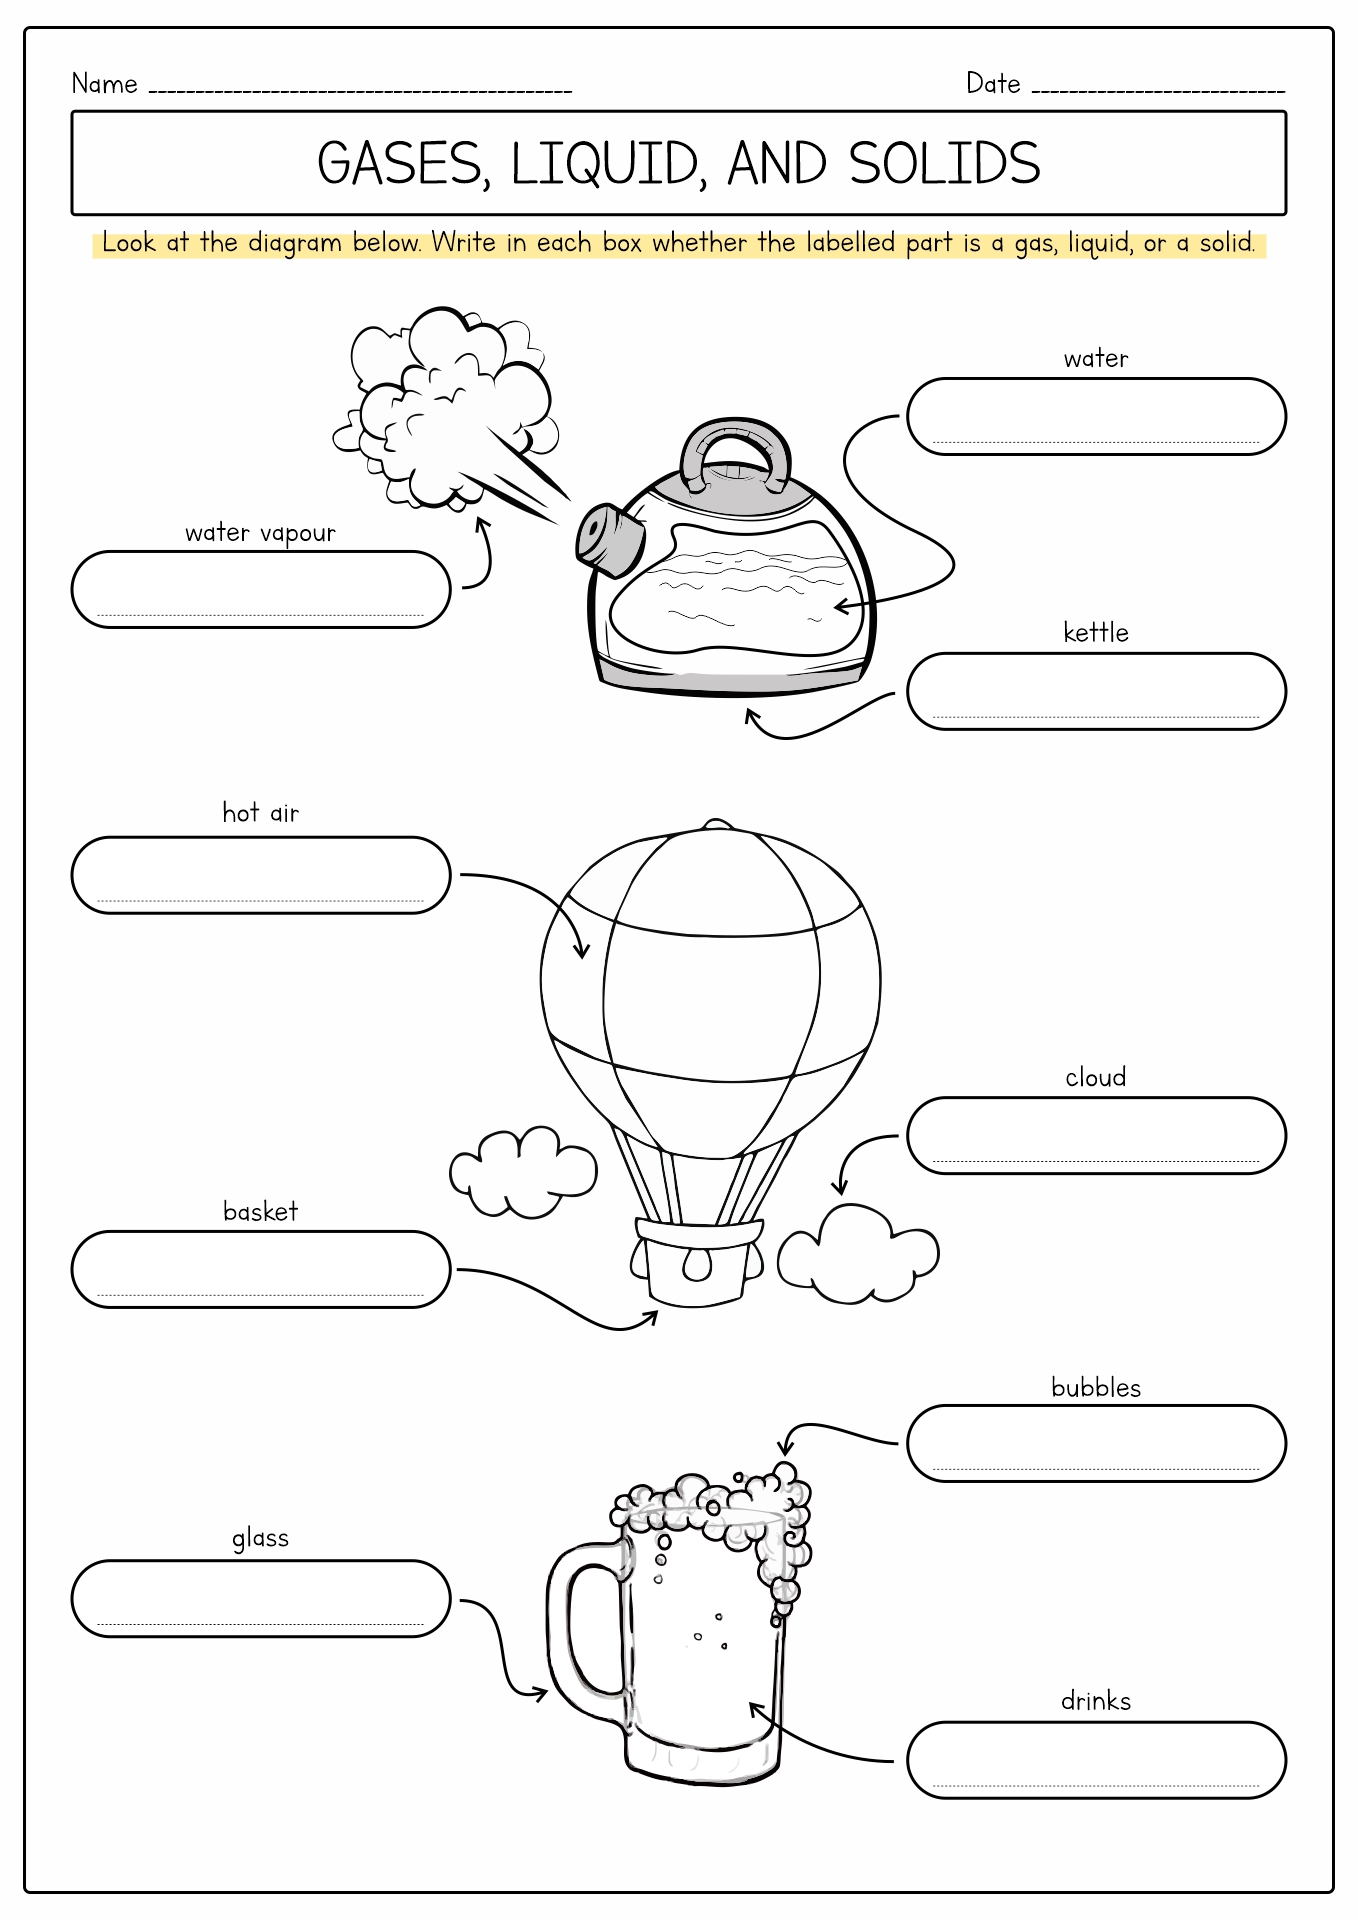 Solid Liquid and Gas Worksheets Image